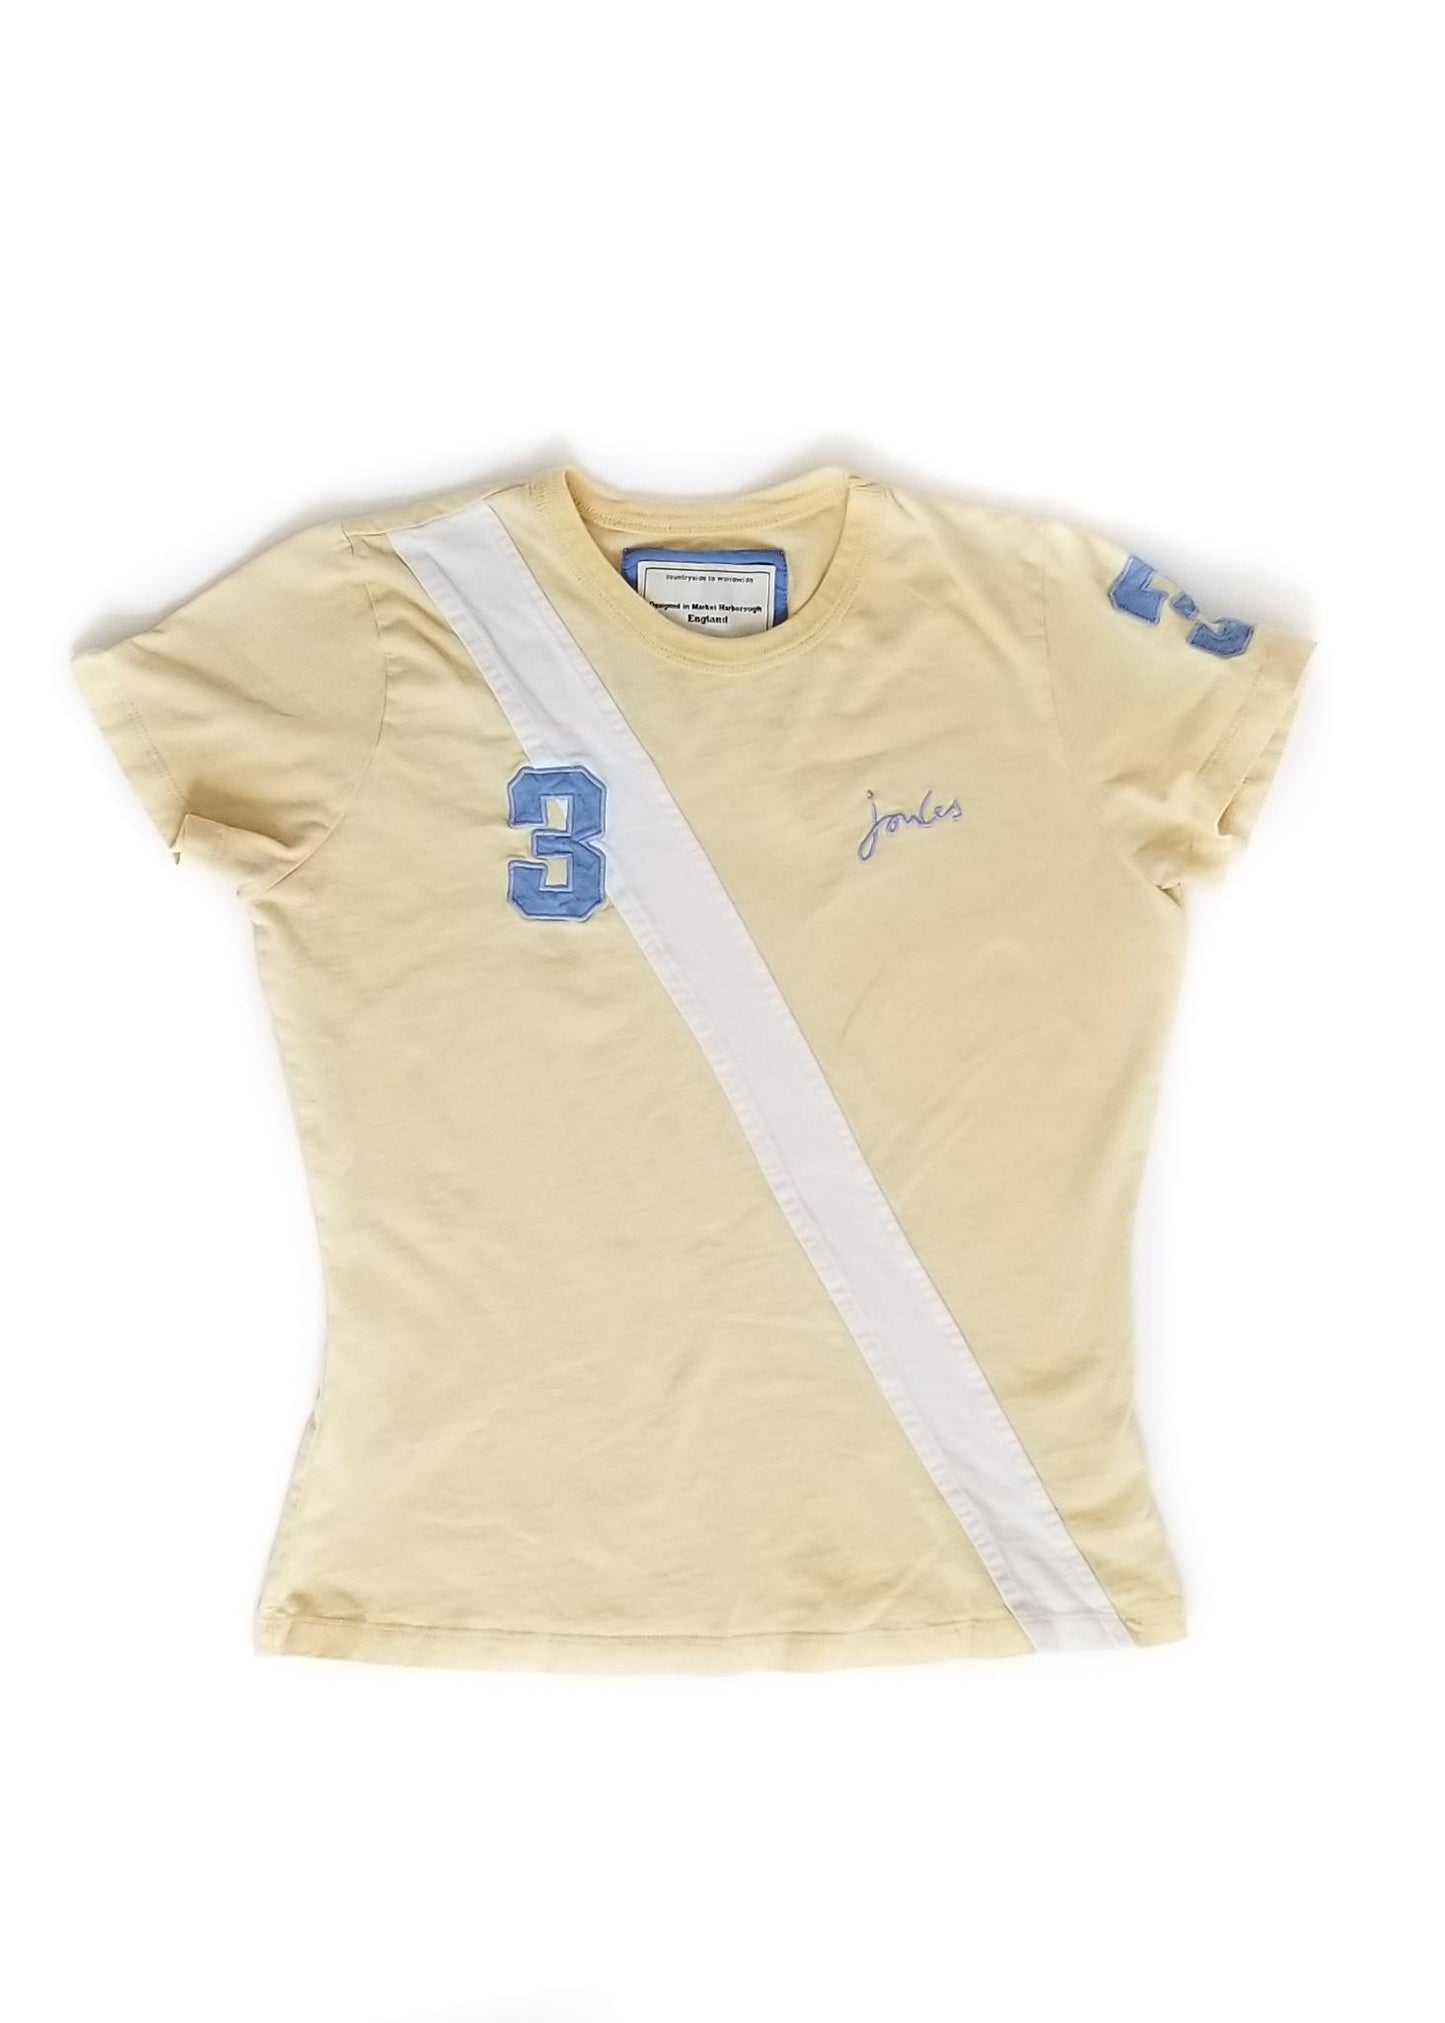 Joules Sportee Tee Shirt - Canary - Women's Size 10 (US)